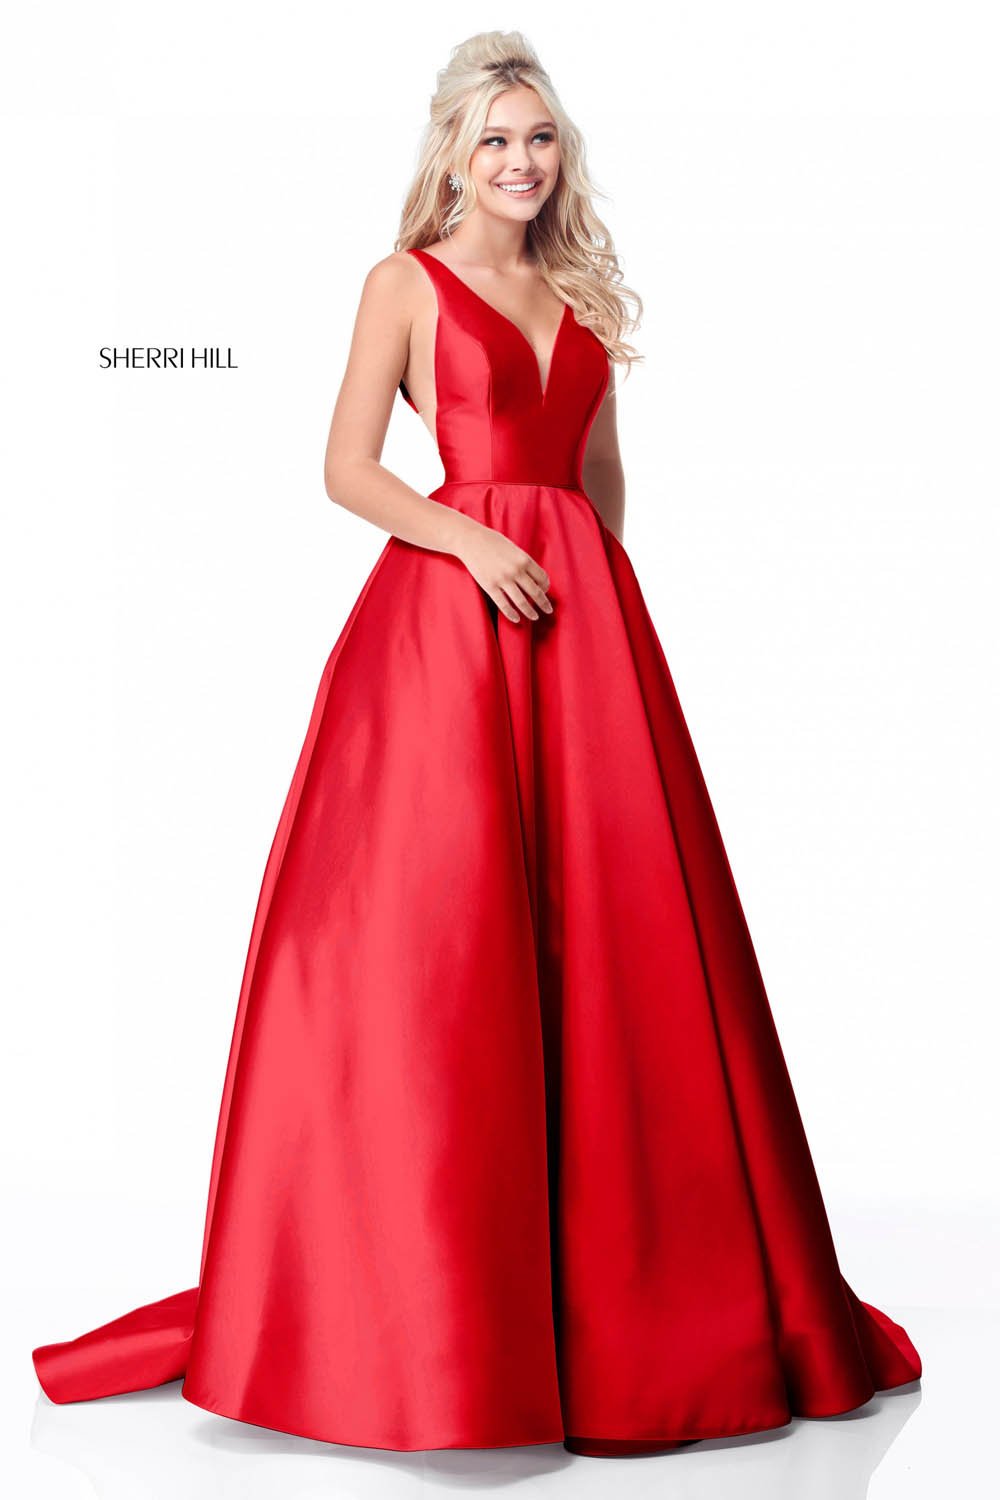 Sherri Hill 51856 dress images in these colors: Emerald, Light Blue, Red, Black, Ivory, Pink, Lilac, Yellow, Royal.